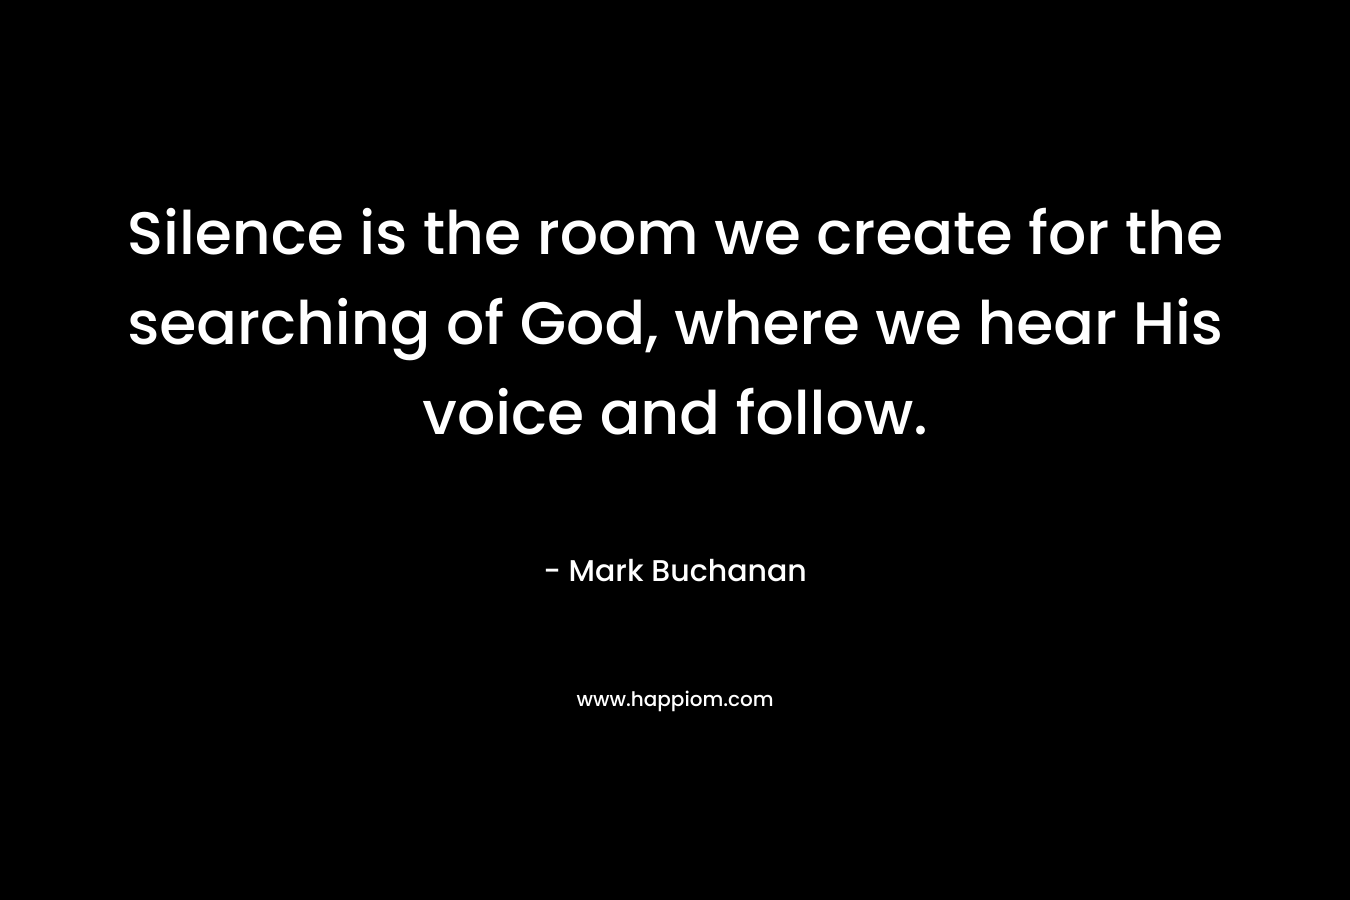 Silence is the room we create for the searching of God, where we hear His voice and follow. – Mark Buchanan